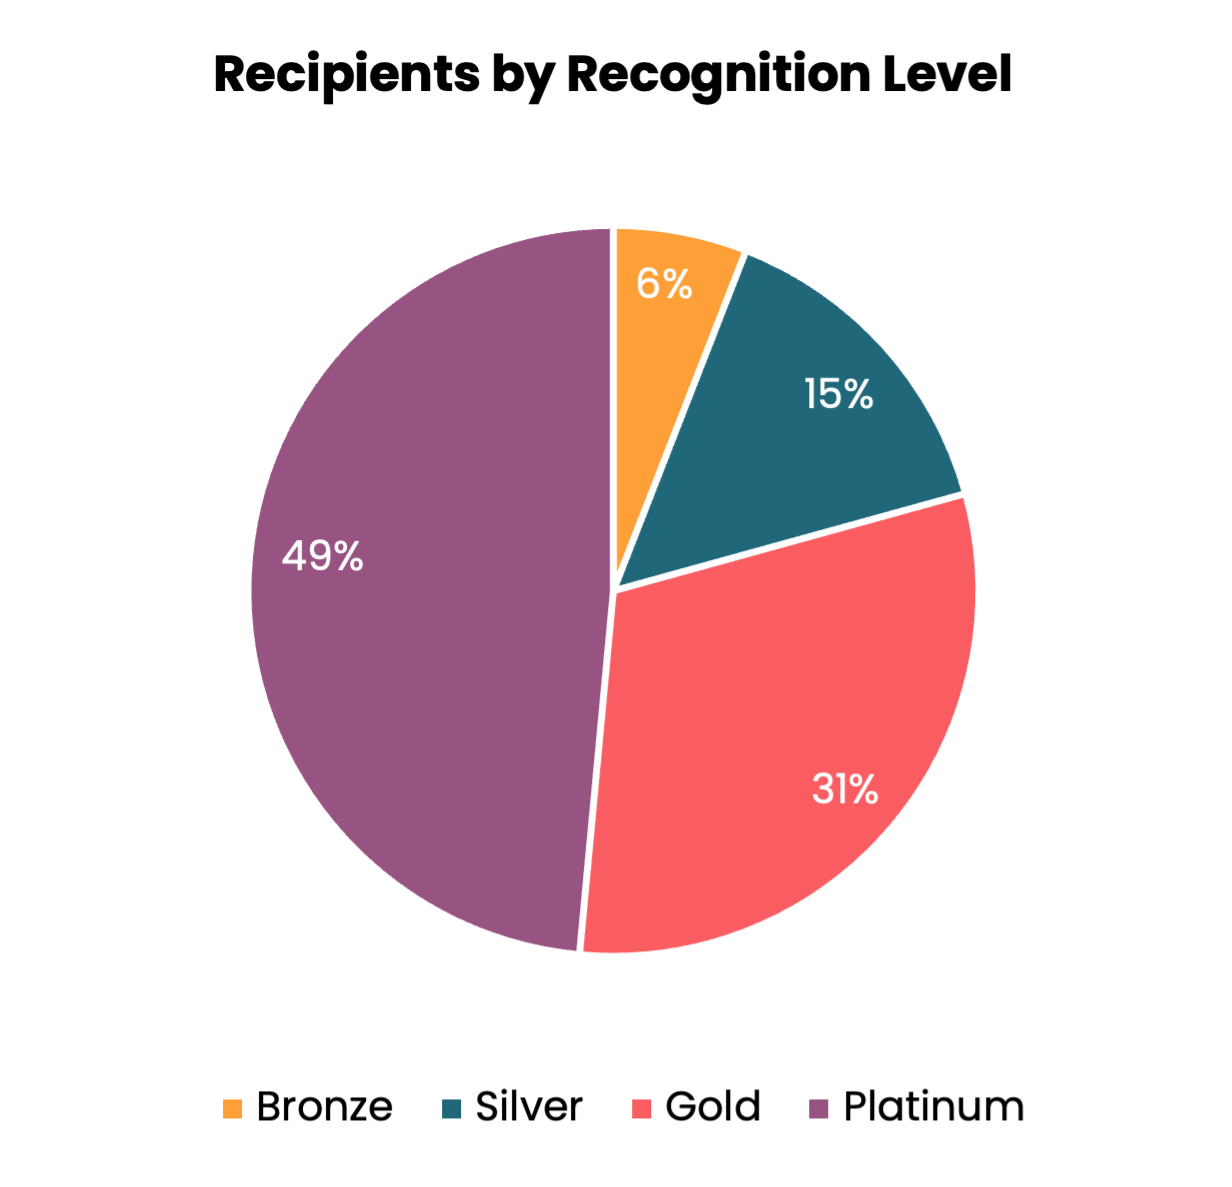 Recipients by Recognition Level | Bronze = 6% | Silver = 15% | Gold = 31% | Platinum = 49%